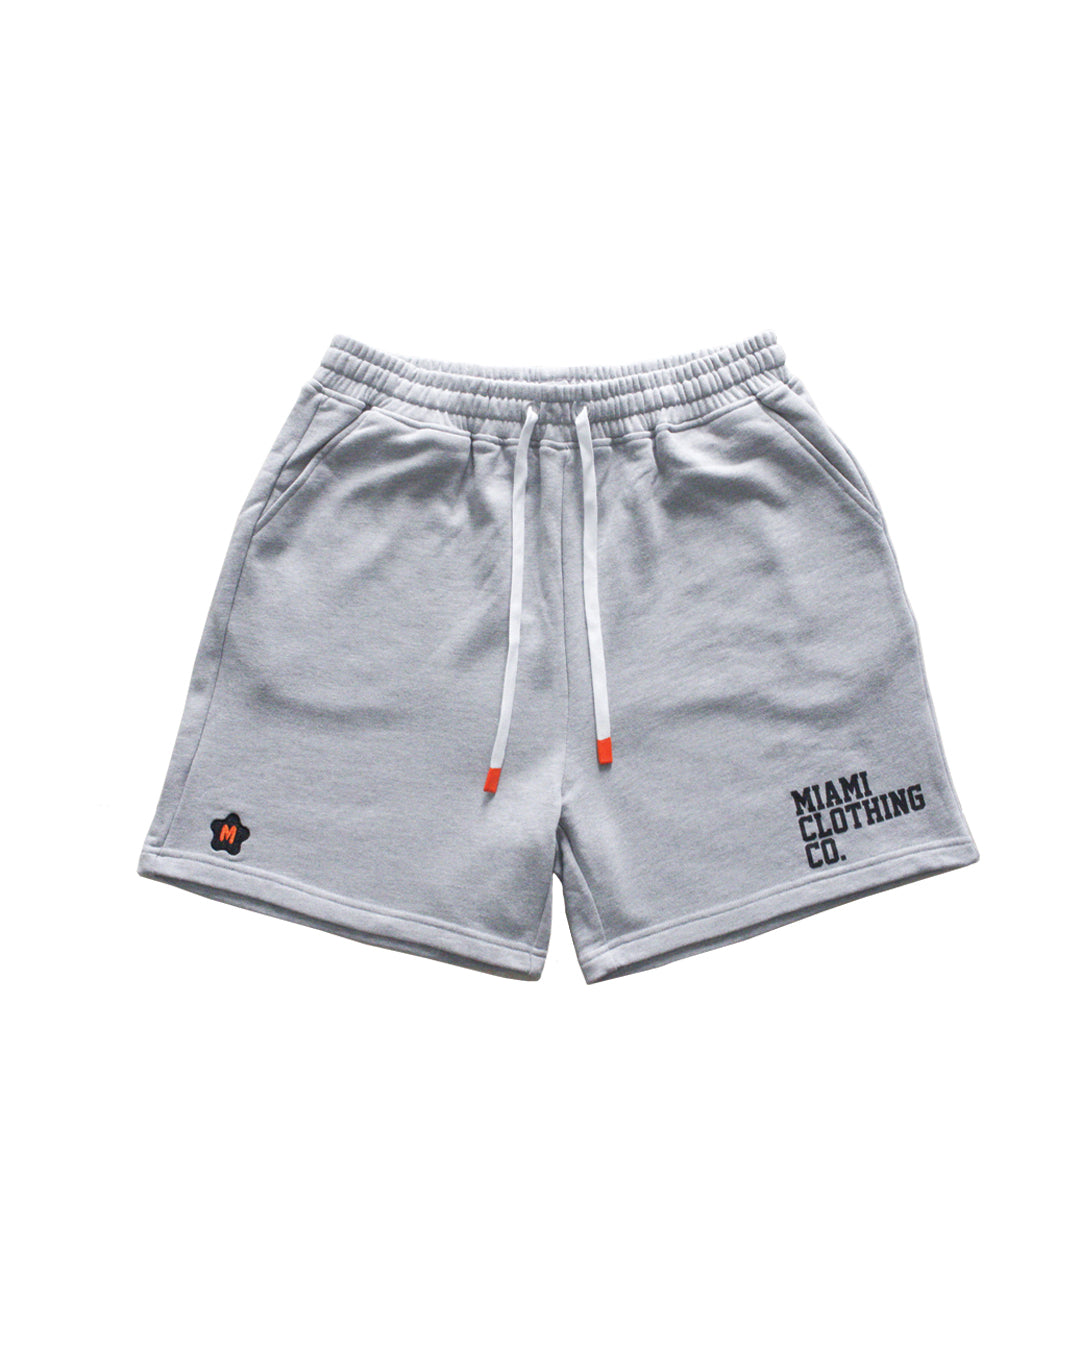 FRENCH TERRY PRINTED AND EMBROIDERED LOGO SHORTS